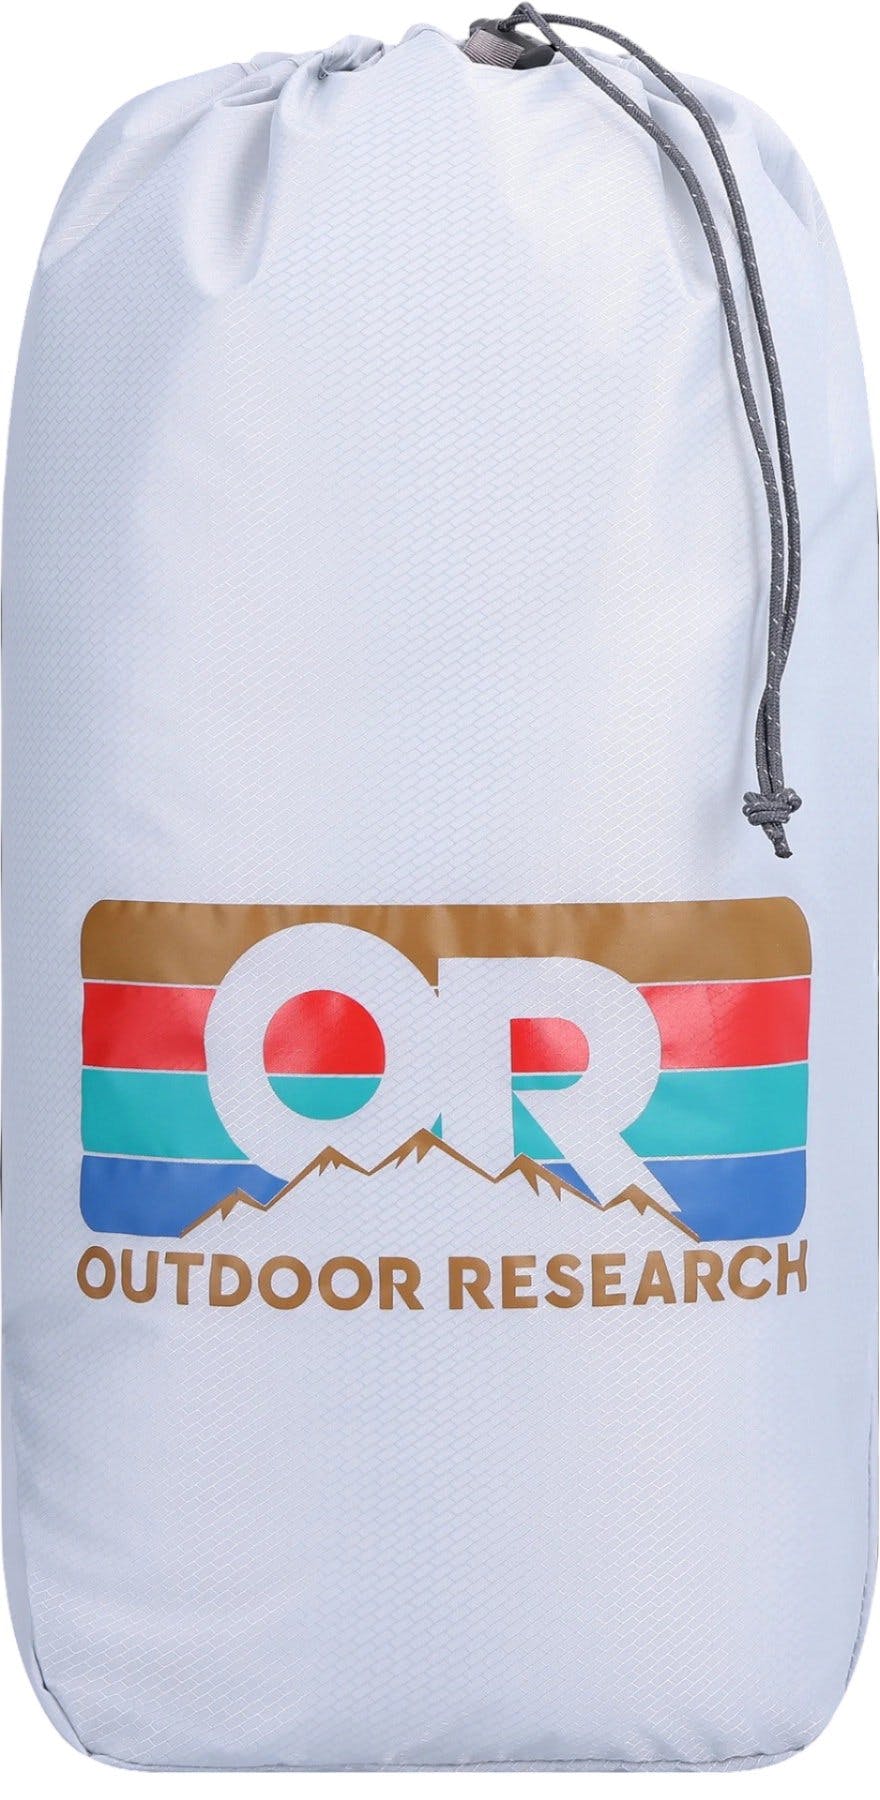 Product image for PackOut Graphic Stuff Sack 10L